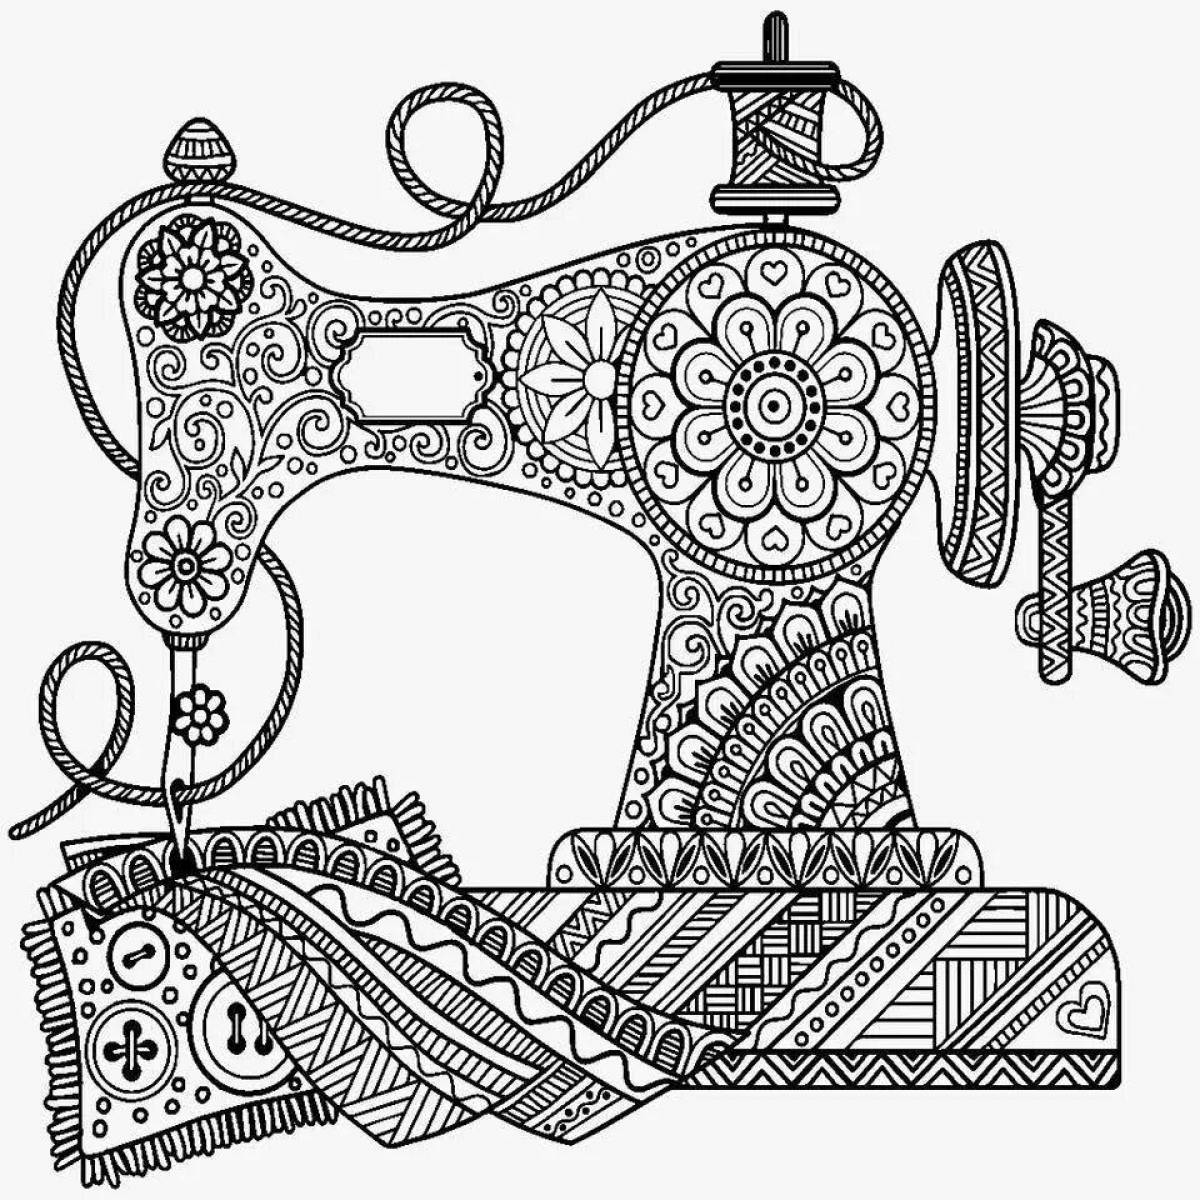 Traditional sewing machine coloring book